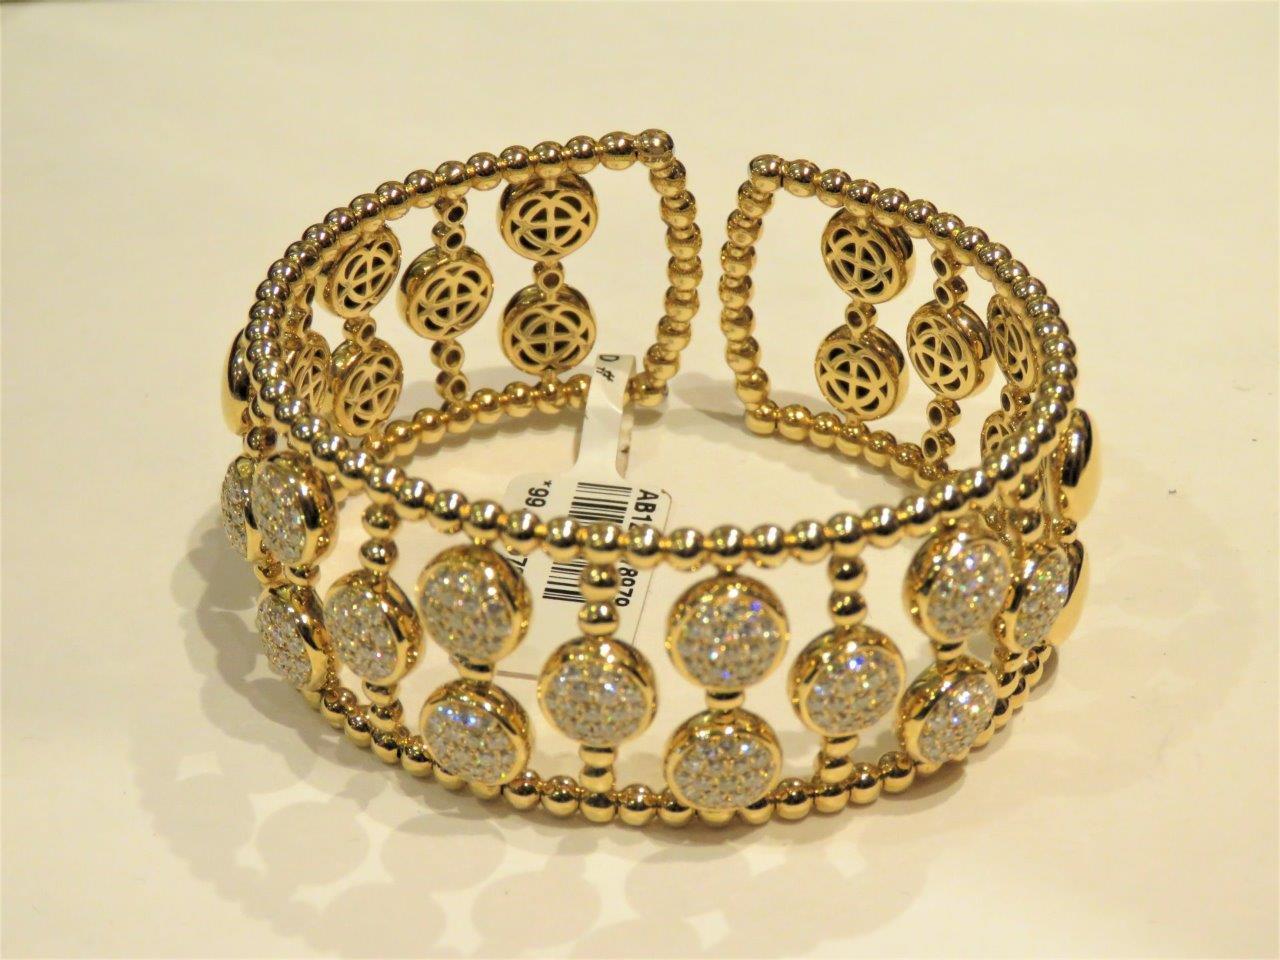 The Following Items we are offering is a Rare Important Estate Radiant 18KT Gold Large Diamond Gold Beaded Bangle Cuff Bracelet. Bangle is Beautifully comprised of Gorgeous Natural Fancy Diamonds!!! T.C.W approx 2 3/4CTS. Original Price: $25,000.